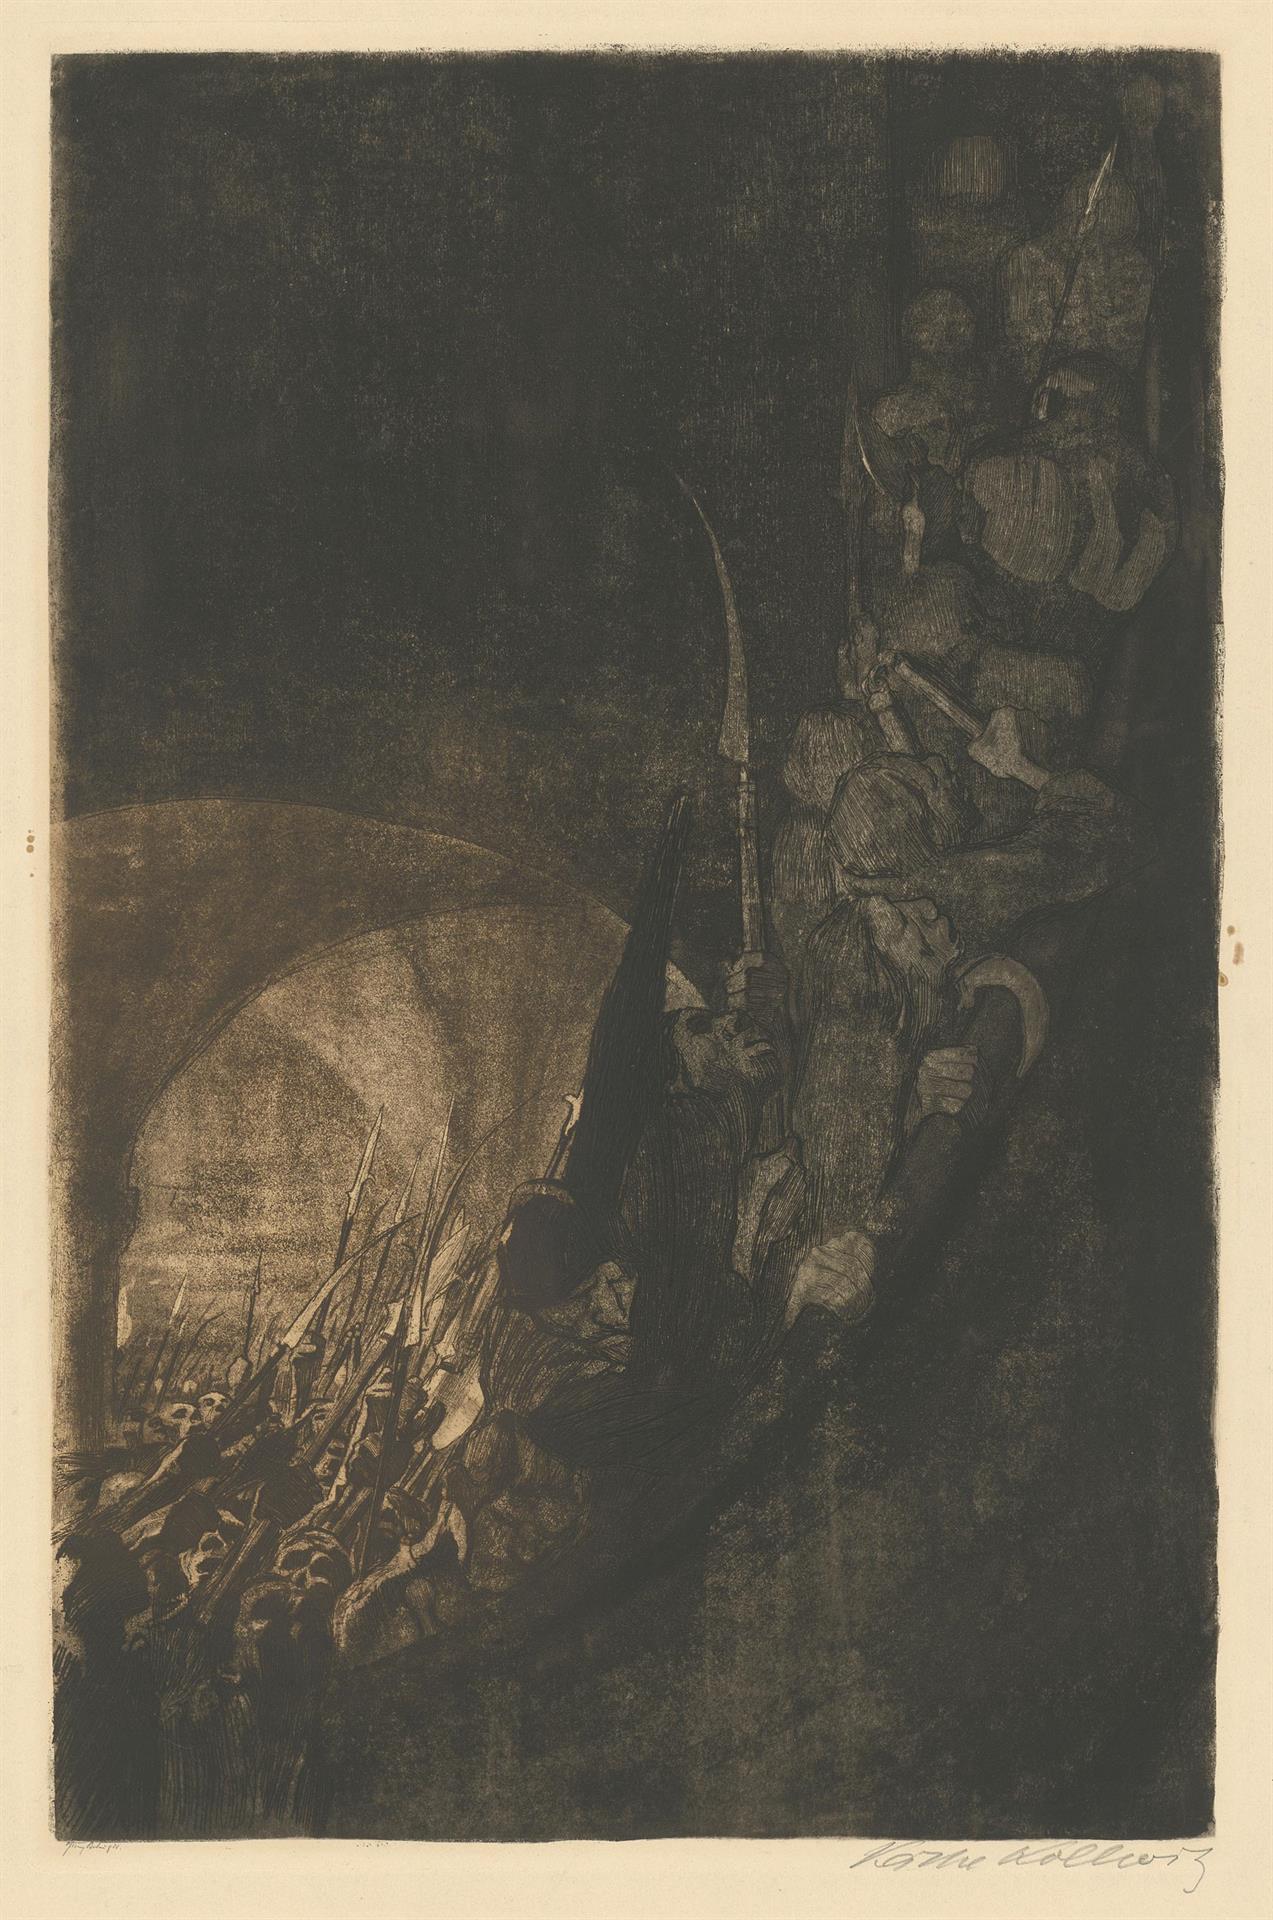 Käthe Kollwitz, Arming in a Vault, sheet 4 of the cycle »Peasants War«, 1906, bicolour etching with line etching, drypoint, aquatint and soft ground with imprint of Ziegler's transfer paper, Kn 96 VI, Cologne Kollwitz Collection © Käthe Kollwitz Museum Köln